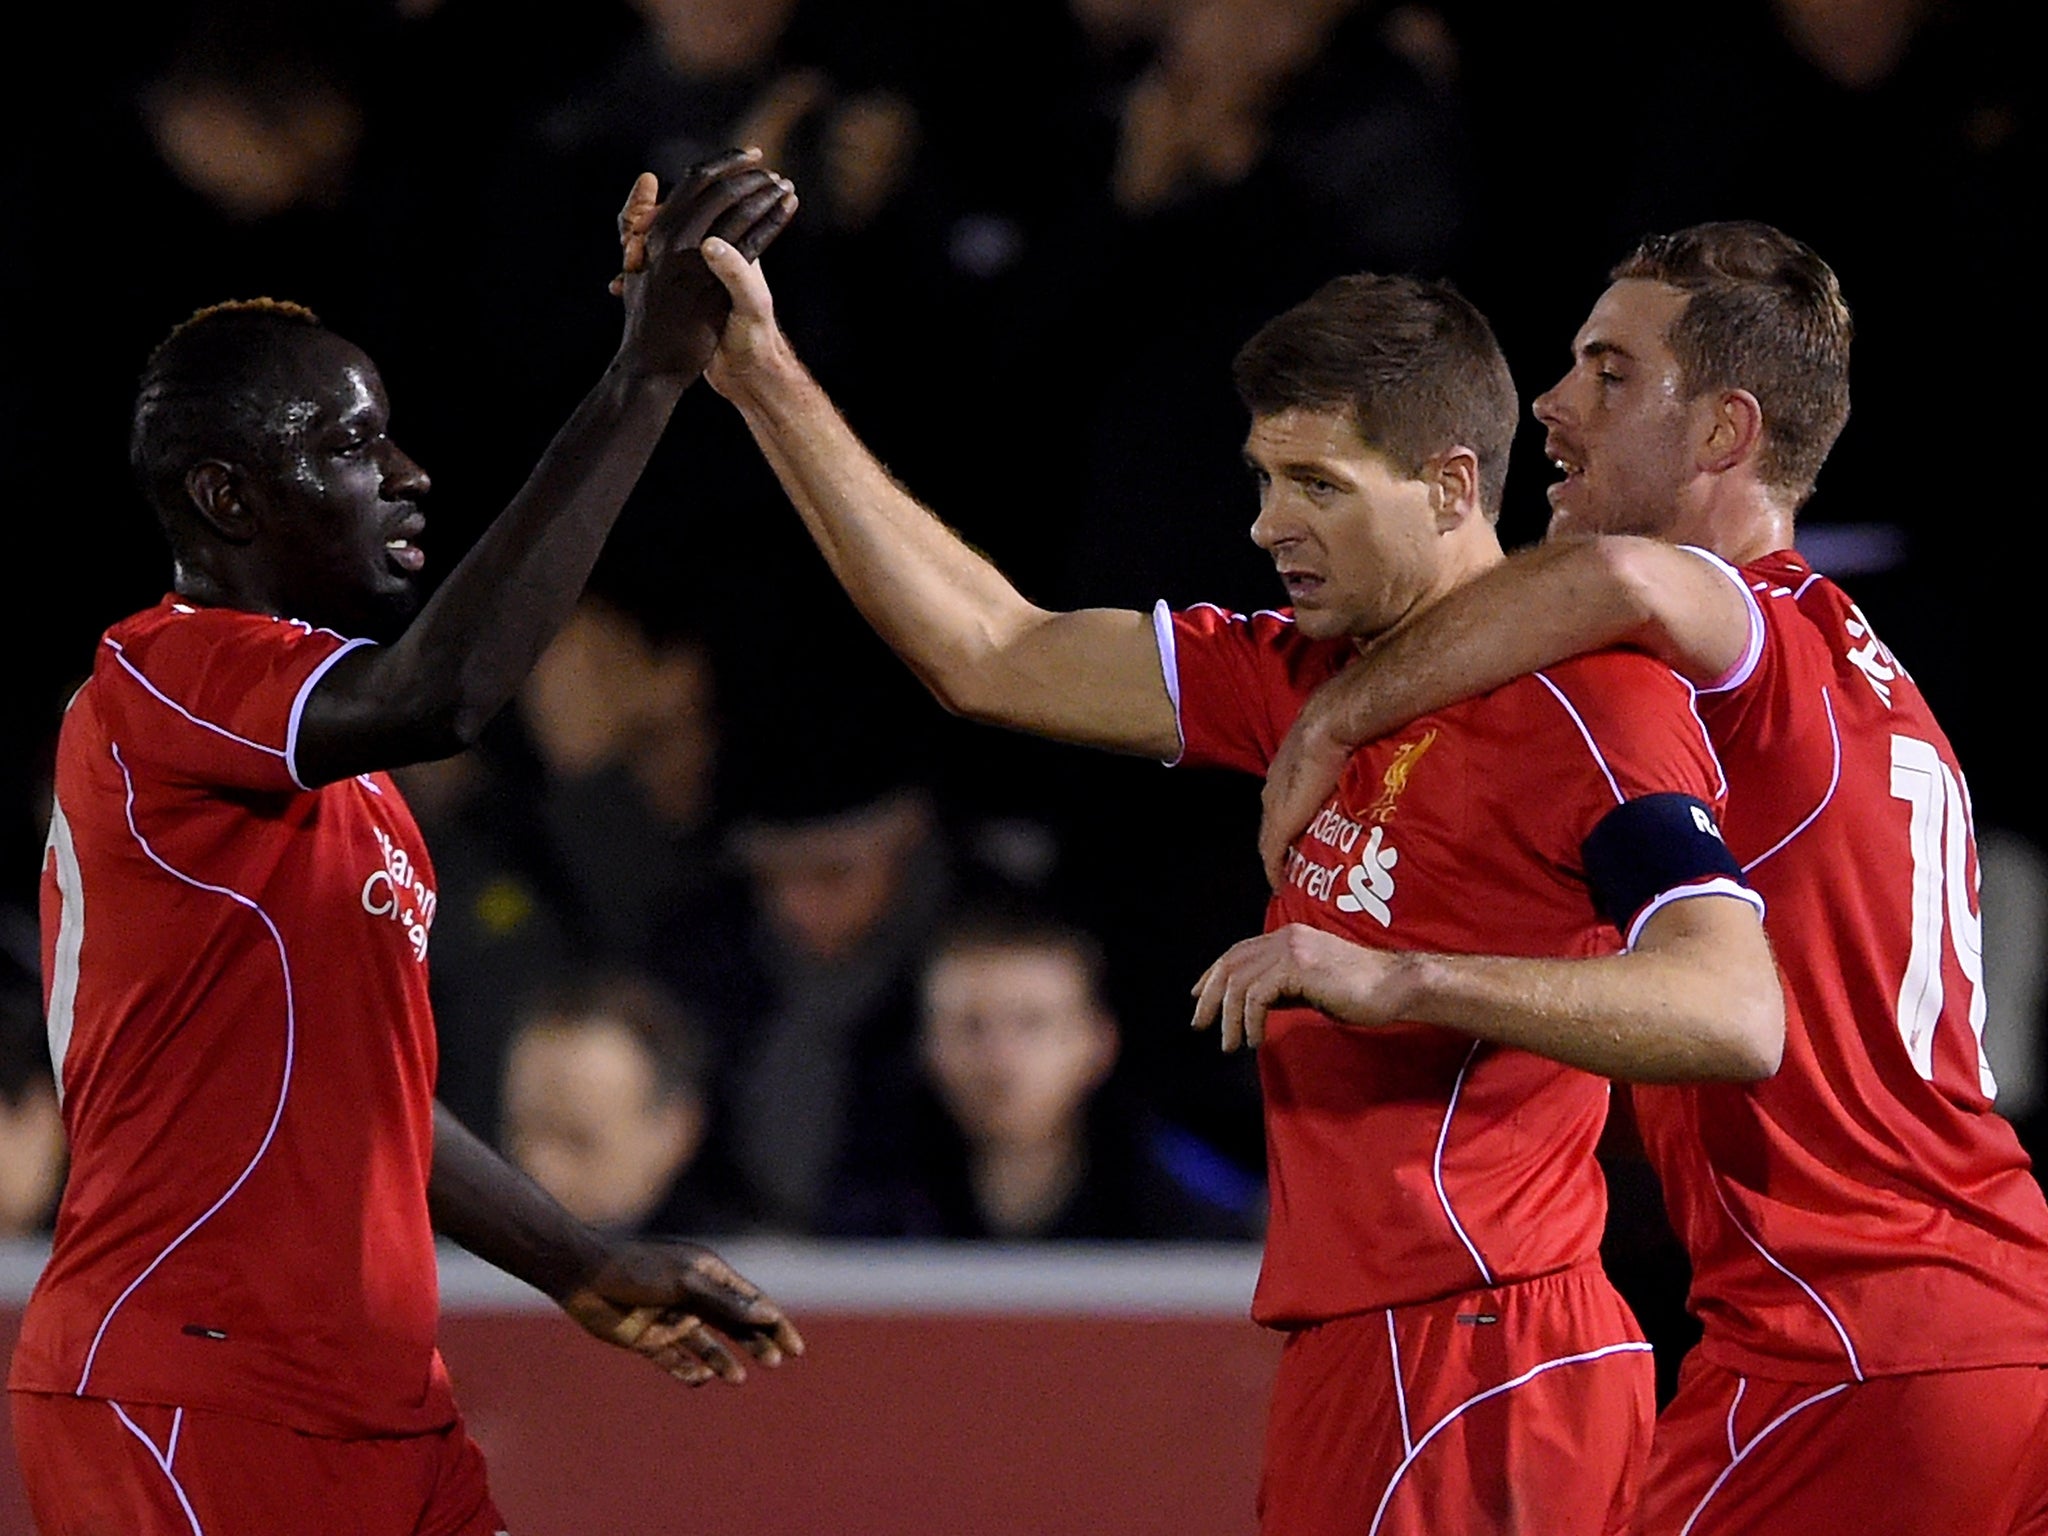 Steven Gerrard is congratulated by teammates Mamadou Sakho, left and Jordan Henderson, right, after scoring Liverpool's second goal from a free kick (Getty)